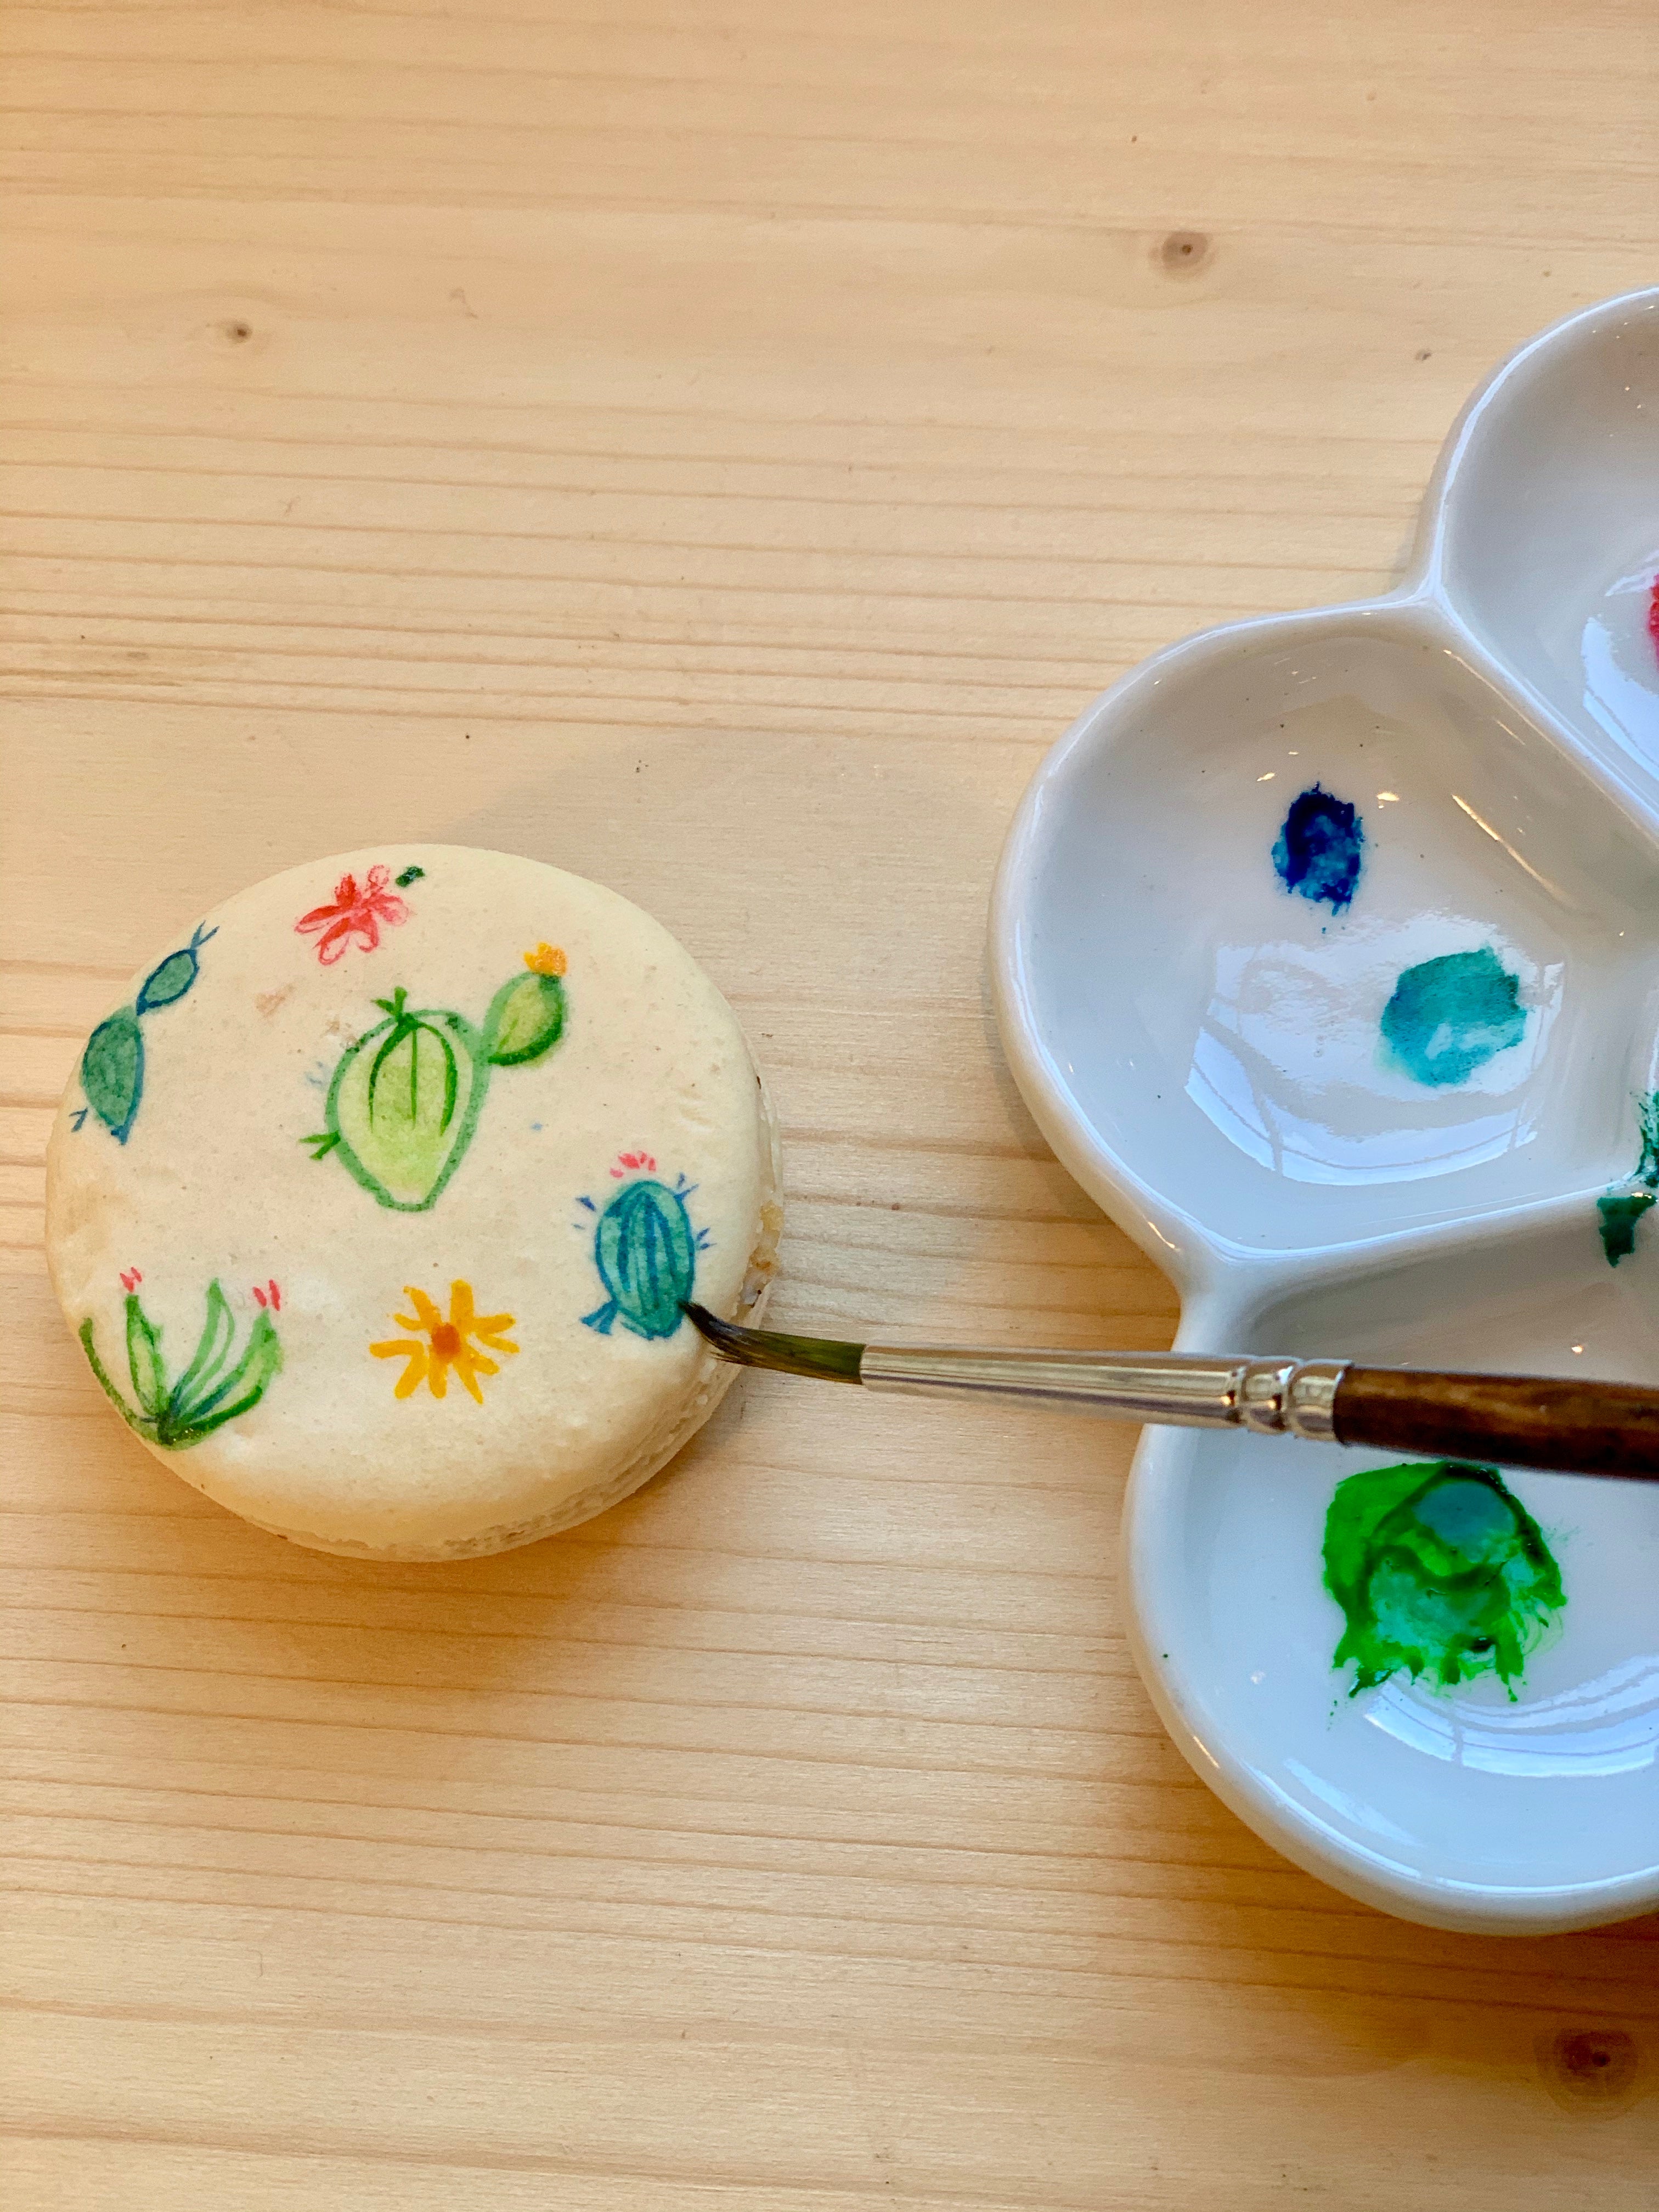 Macaron Painting Workshops - Private Classes Available